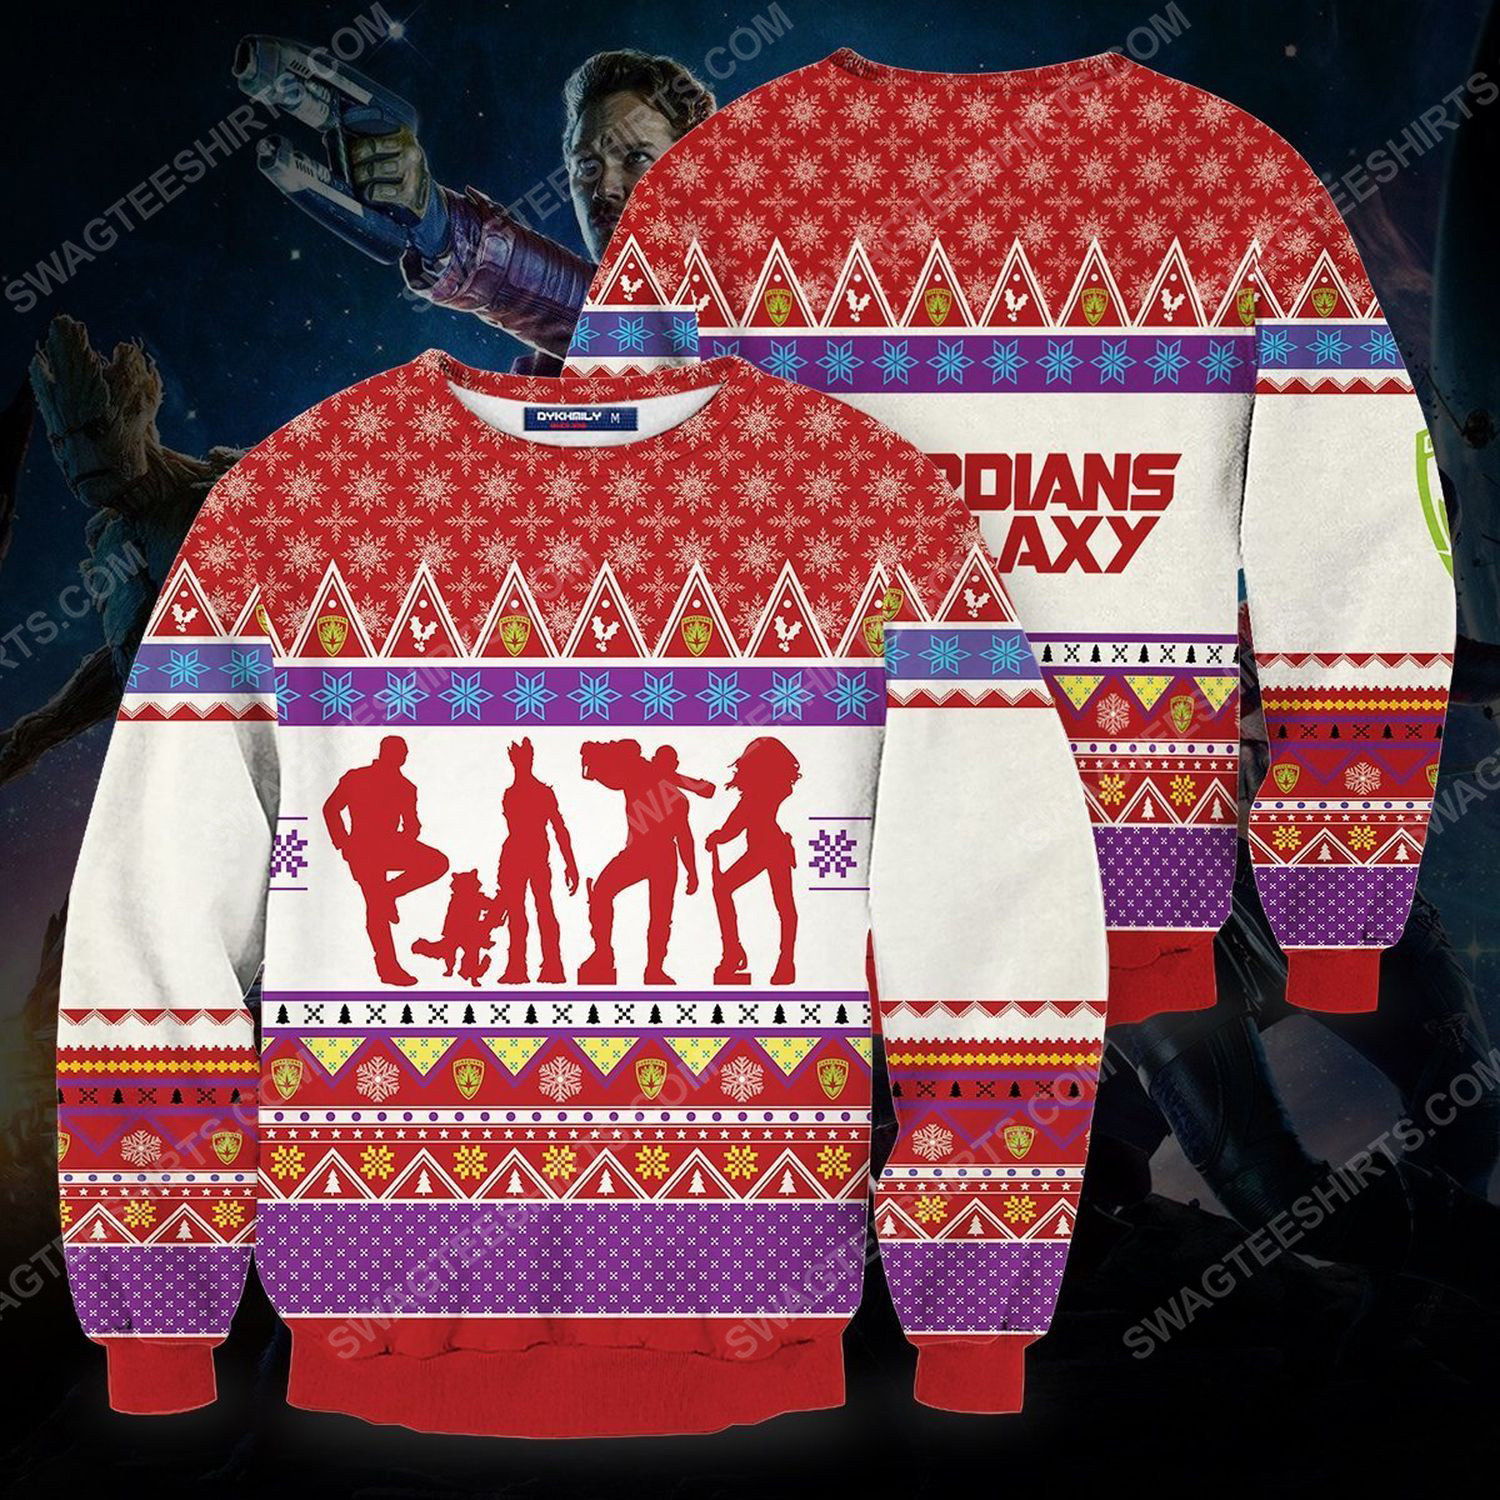 The guardians of the galaxy full print ugly christmas sweater 2